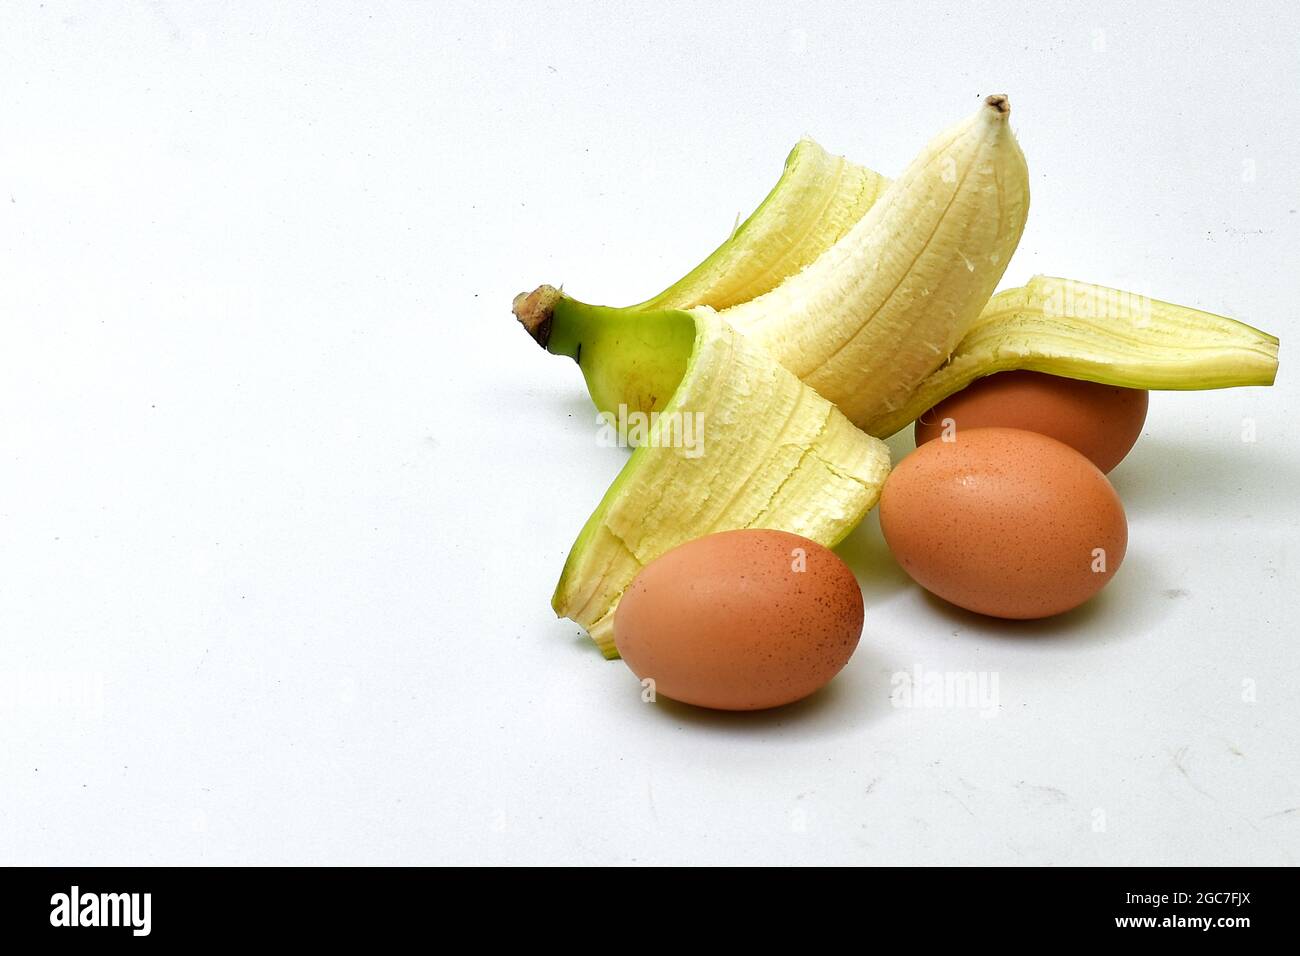 Banana tropical fruit selected from background Stock Photo